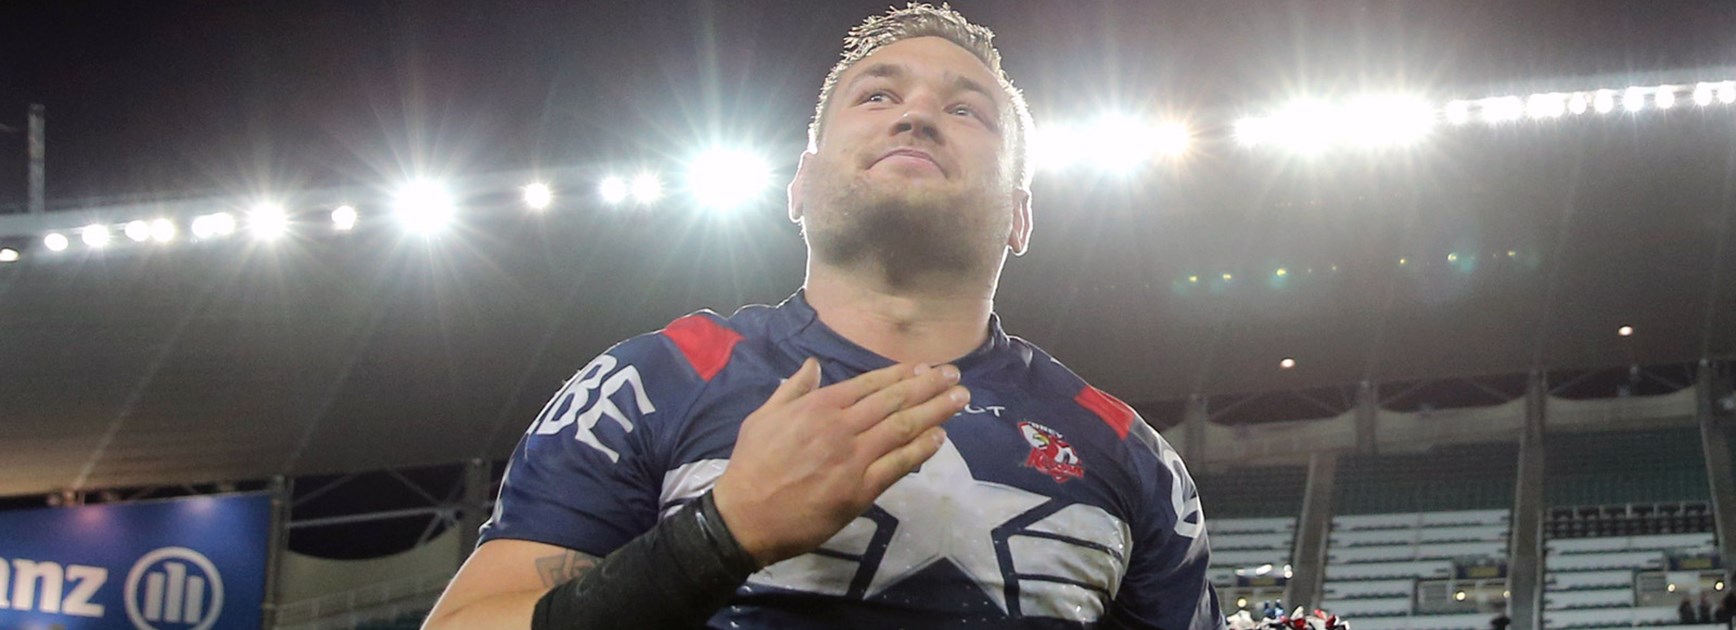 Jared Waerea-Hargreaves was immense for the Roosters in Round 21.